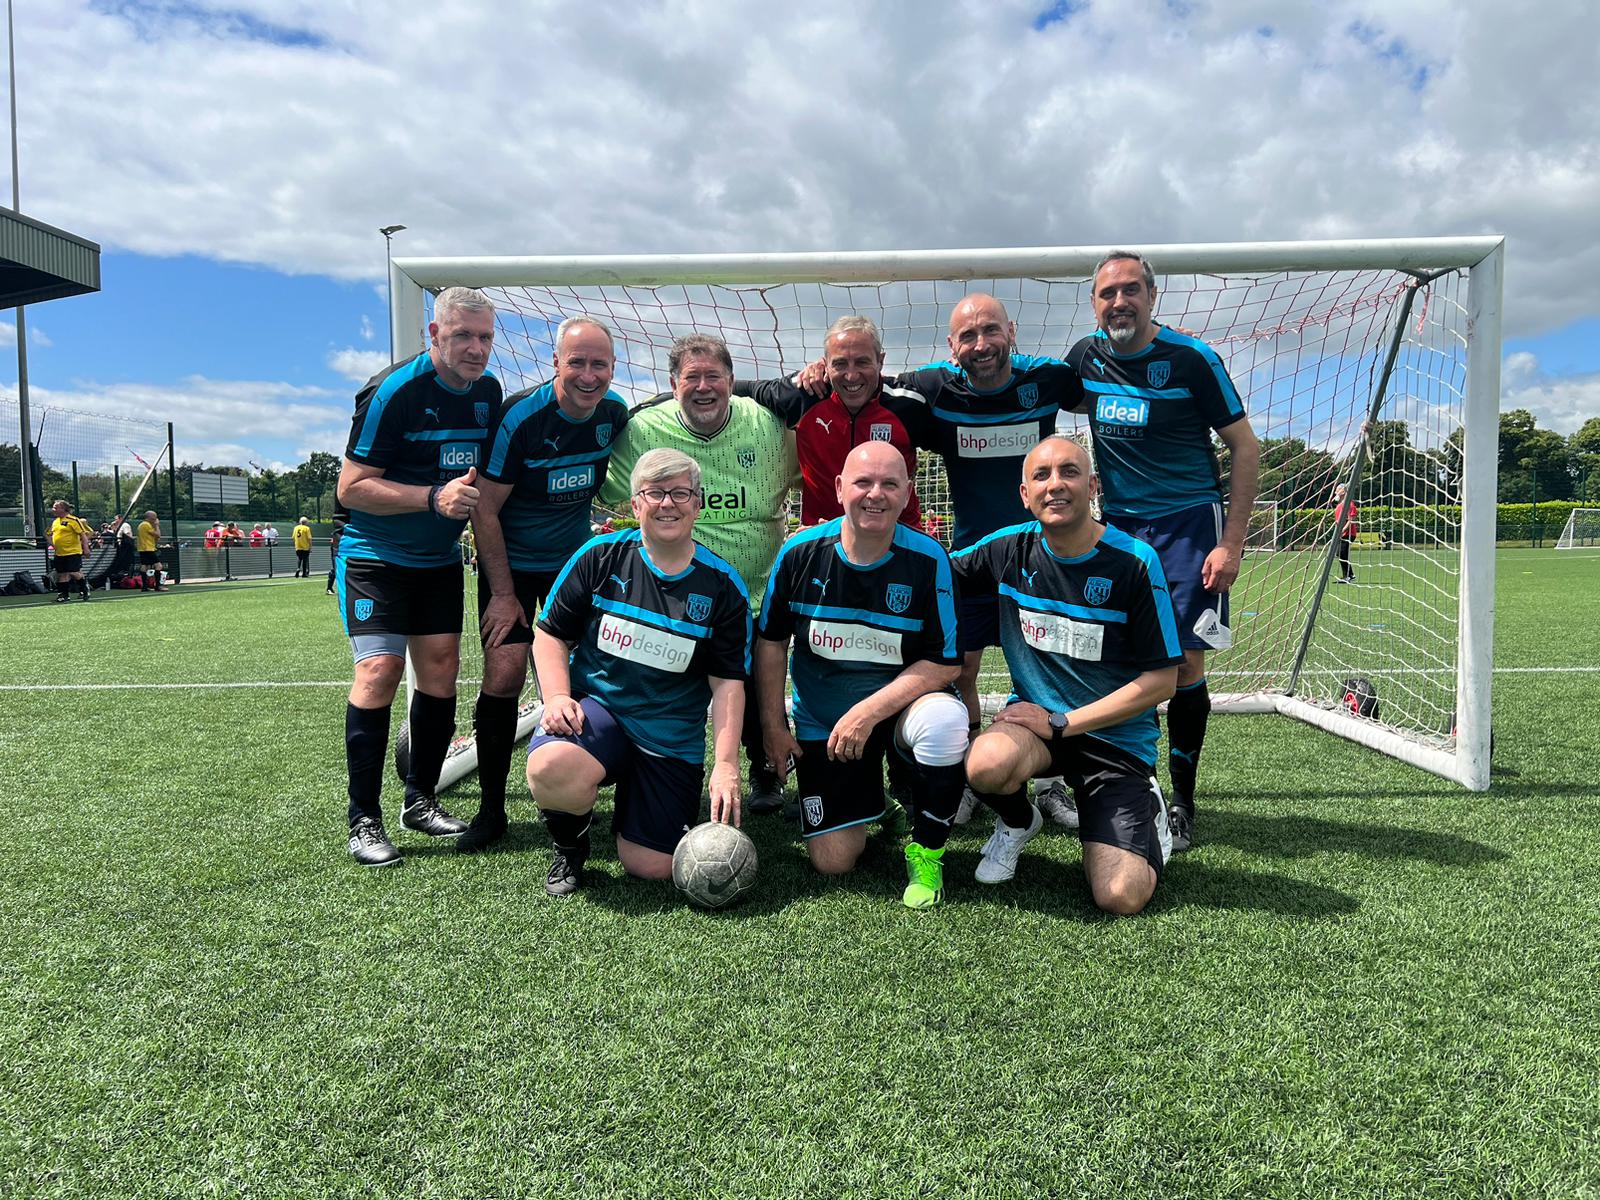 WBA Strollers posing at their first-ever walking football tournament wearing the 2018/19 away shirt.